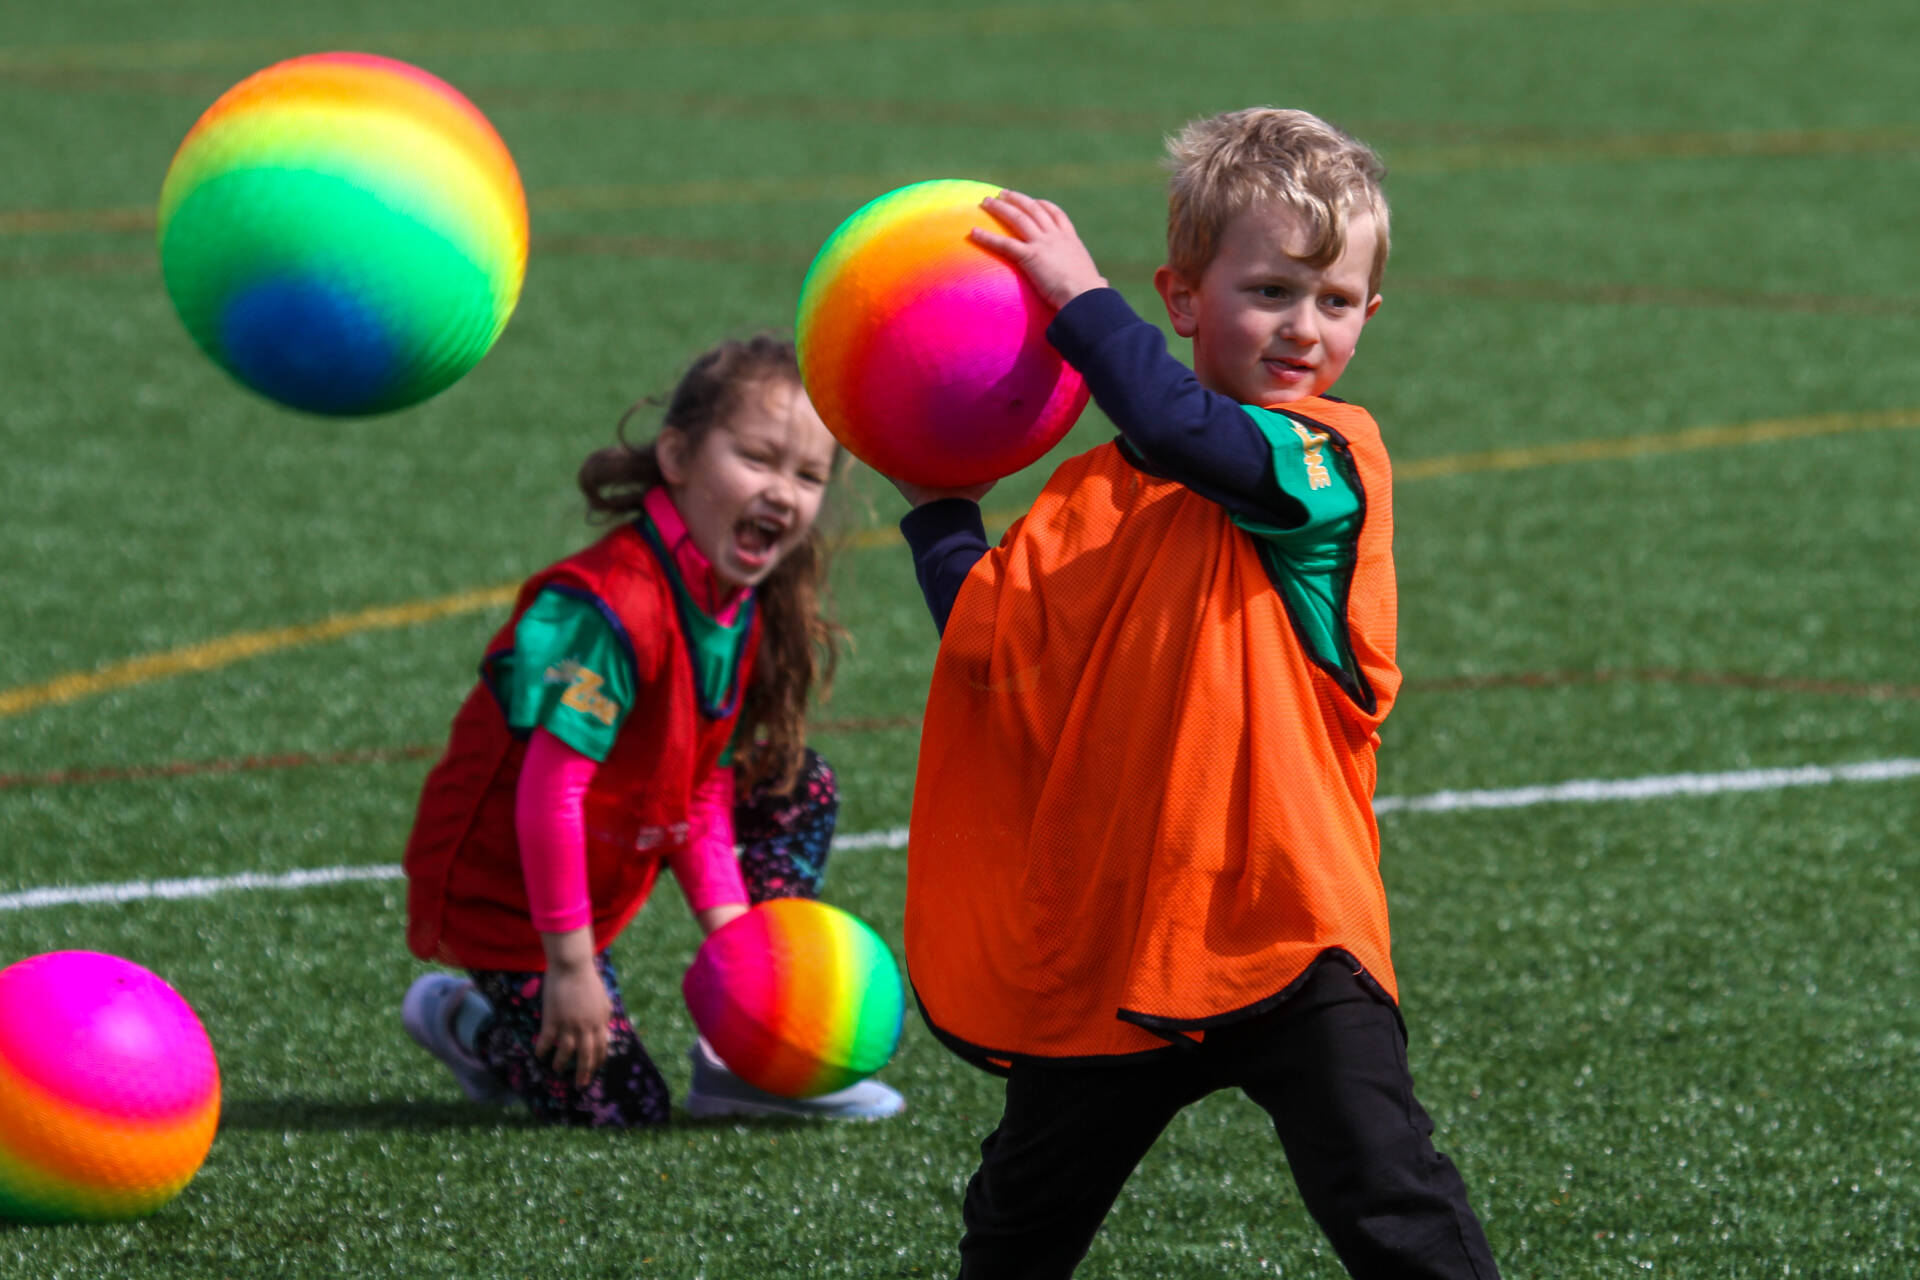 Child about to throw a multi-colour ball during a game of dodgeball